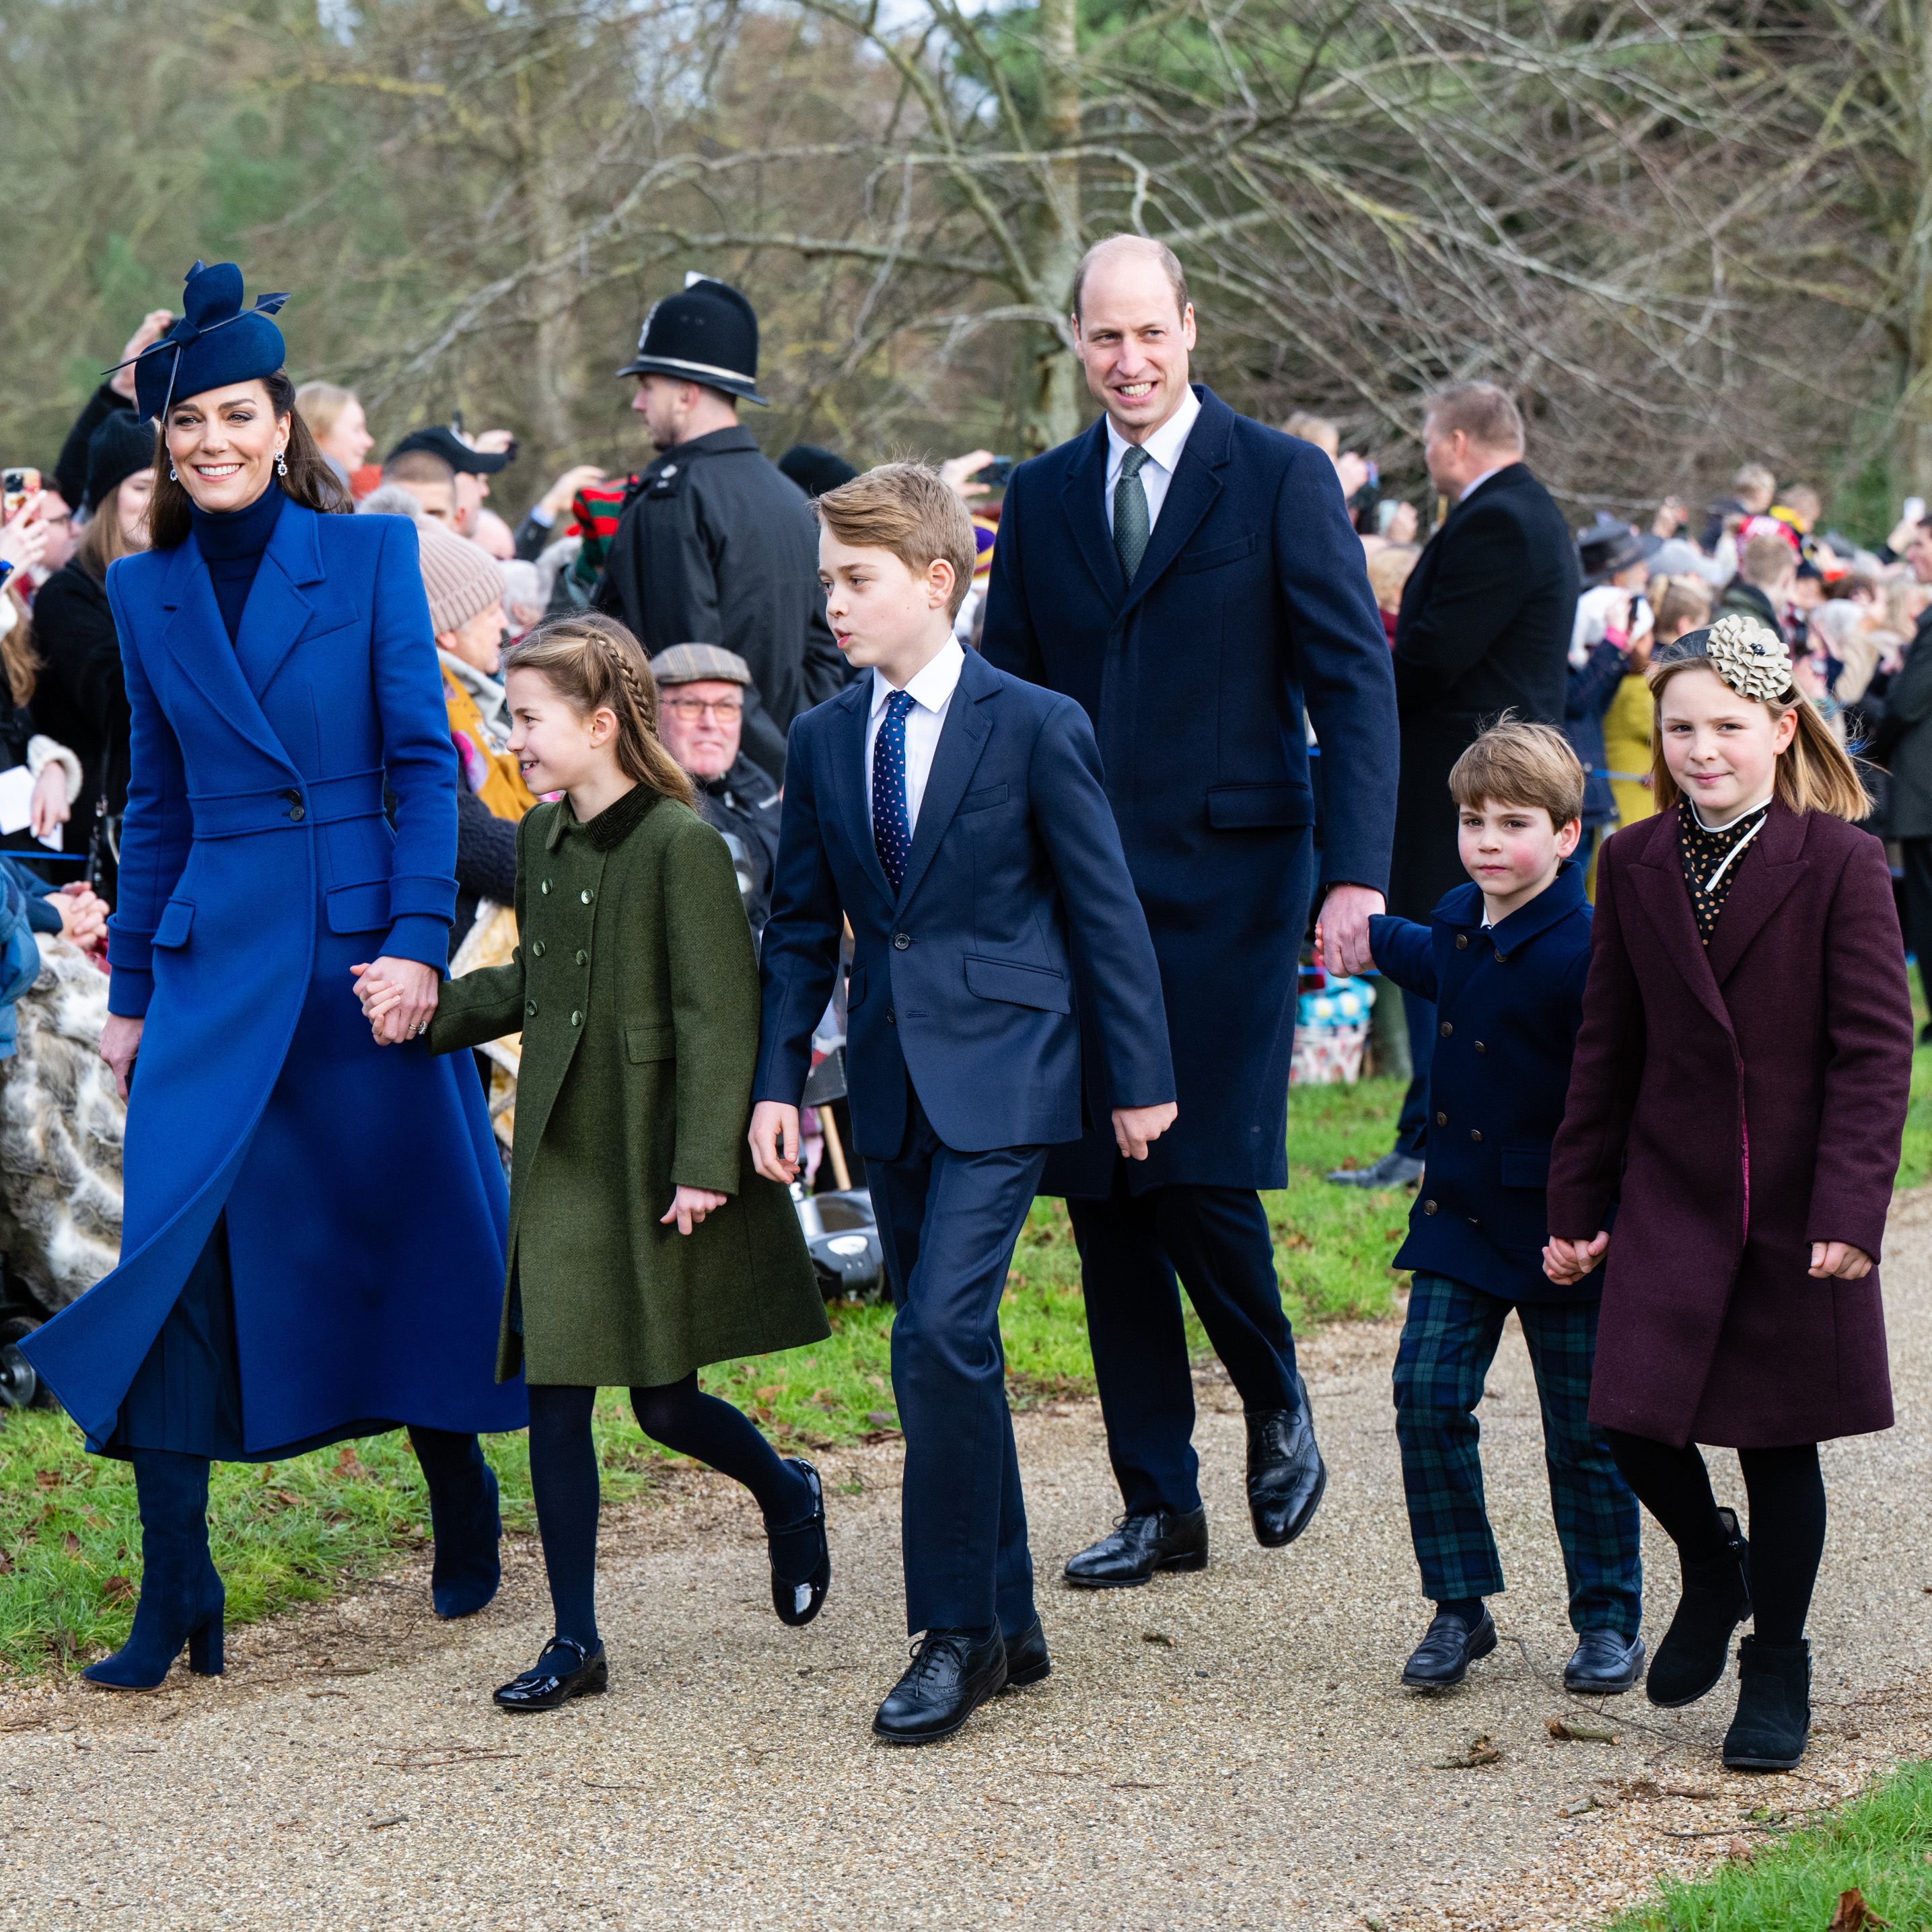 The Best Photos of the Royal Family at Sandringham on Christmas